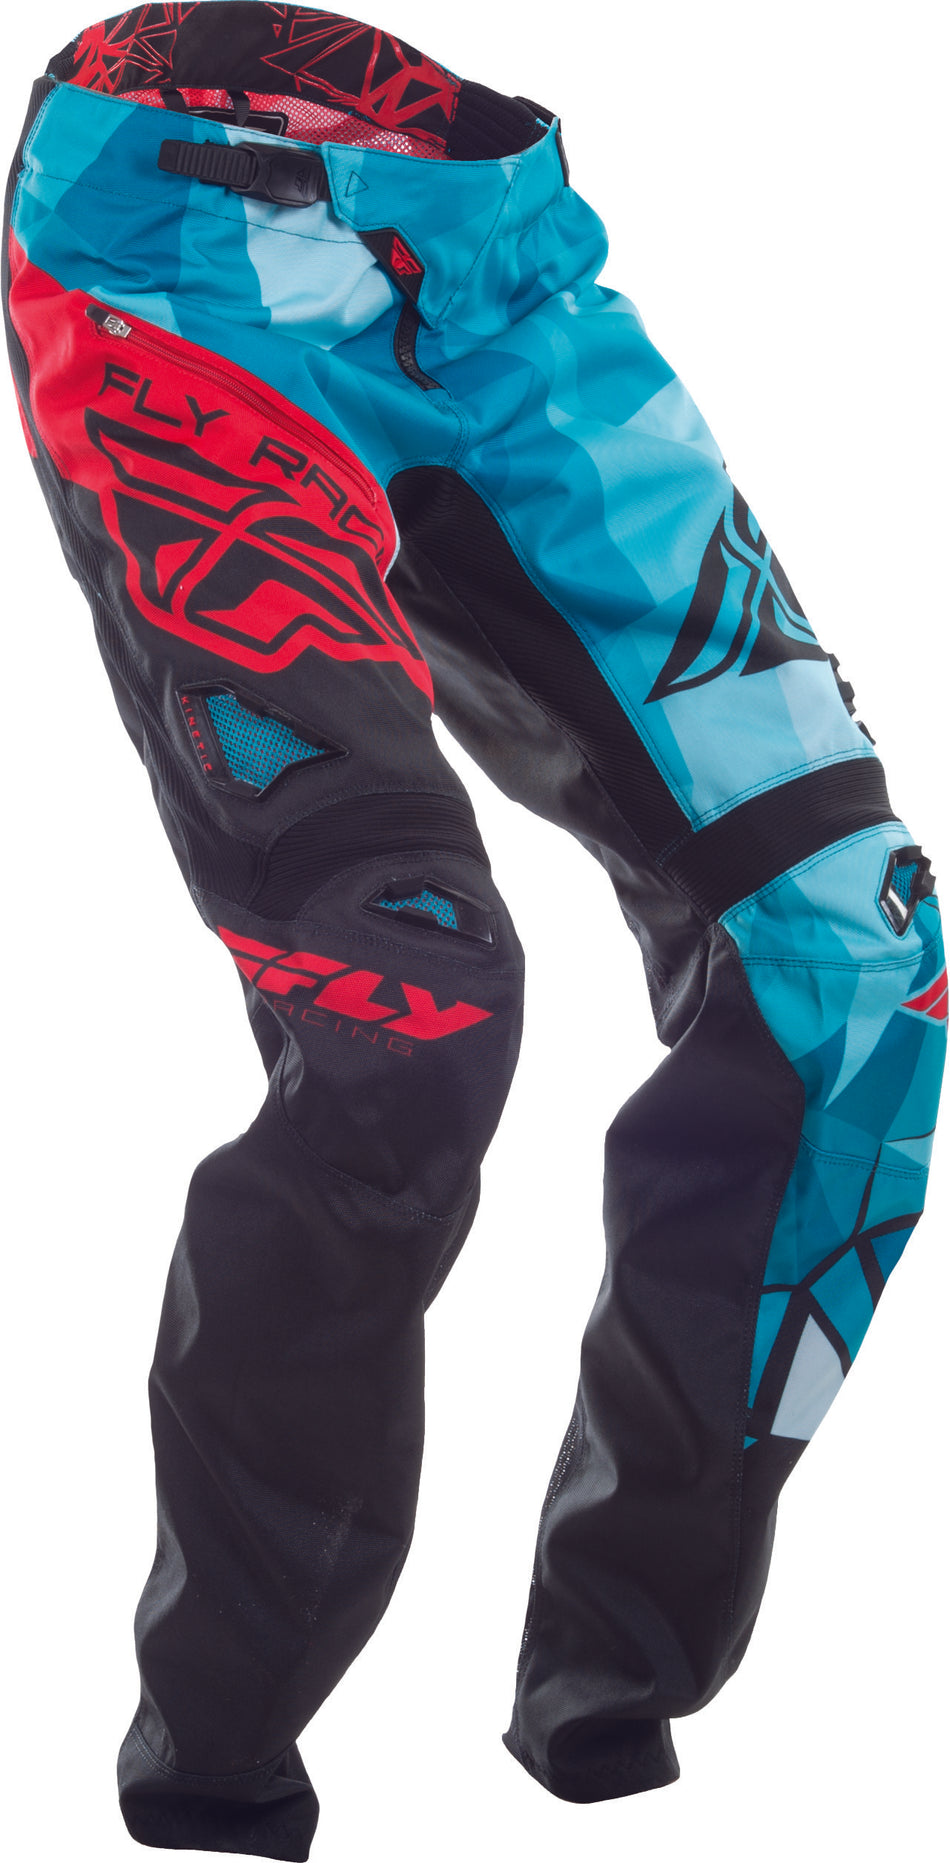 FLY RACING Bicycle Crux Pant Black/Teal/Red Sz 26 370-02926